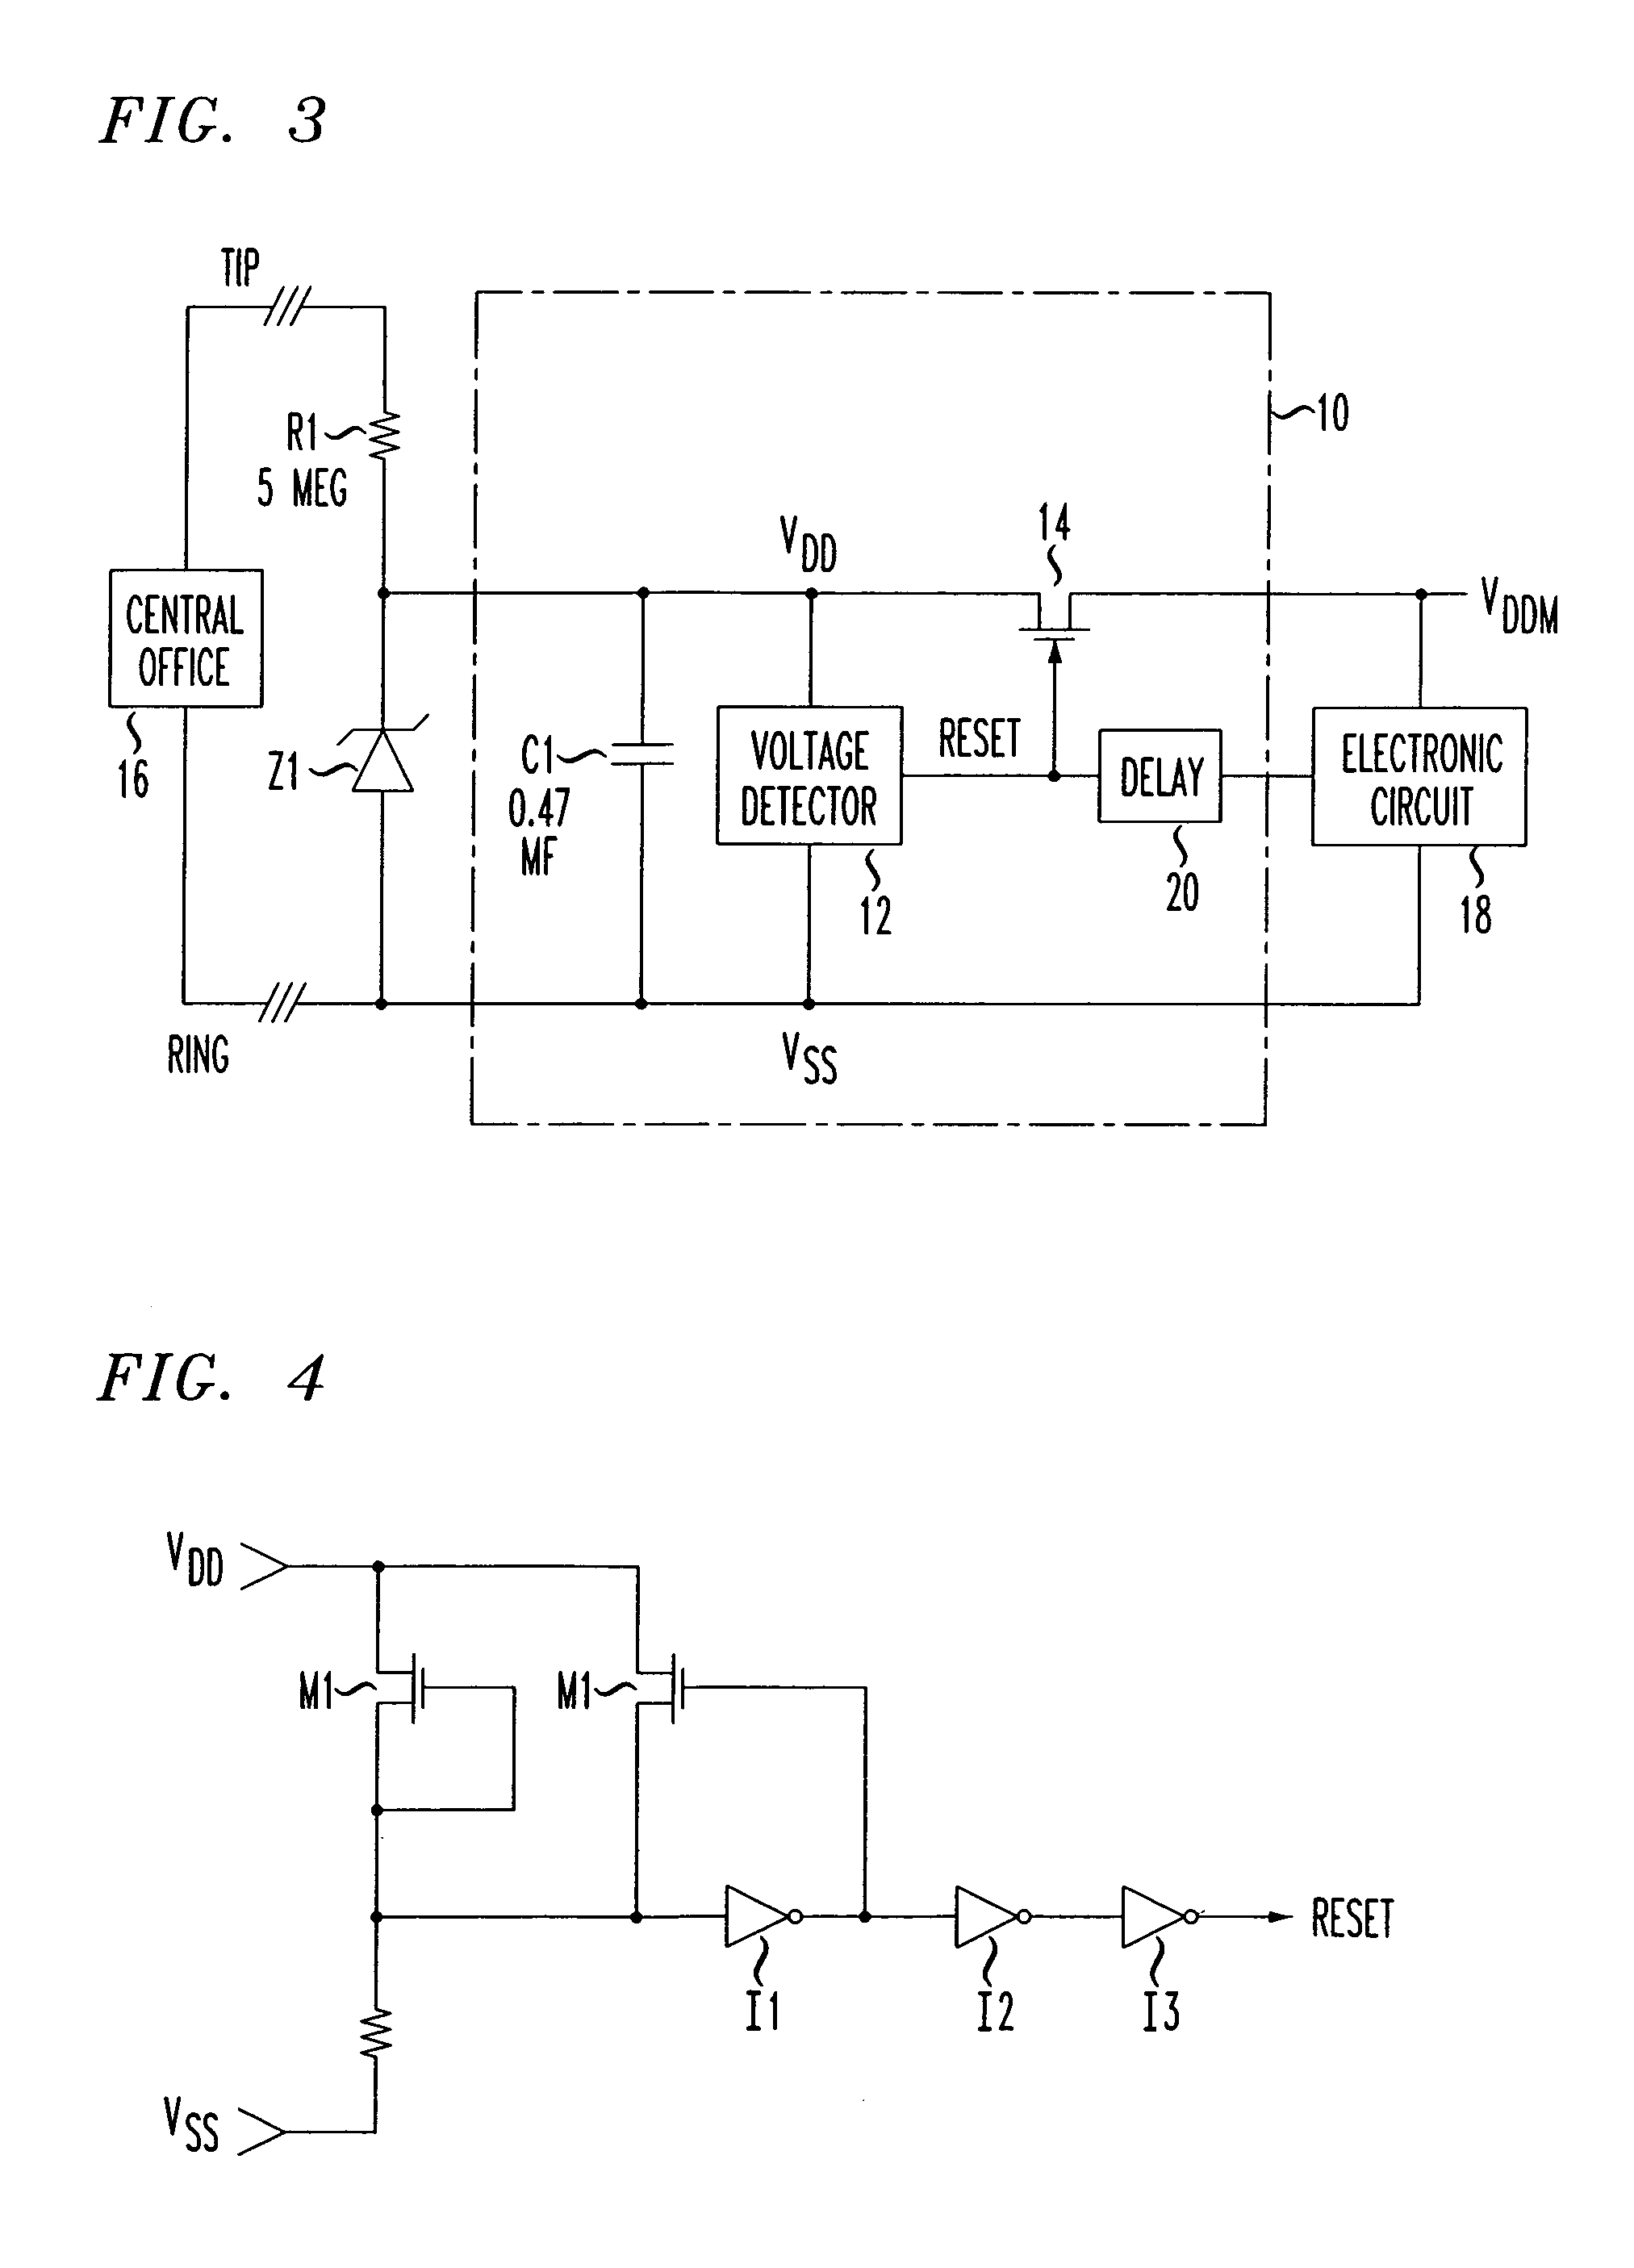 Power up reset circuit for line powered circuit